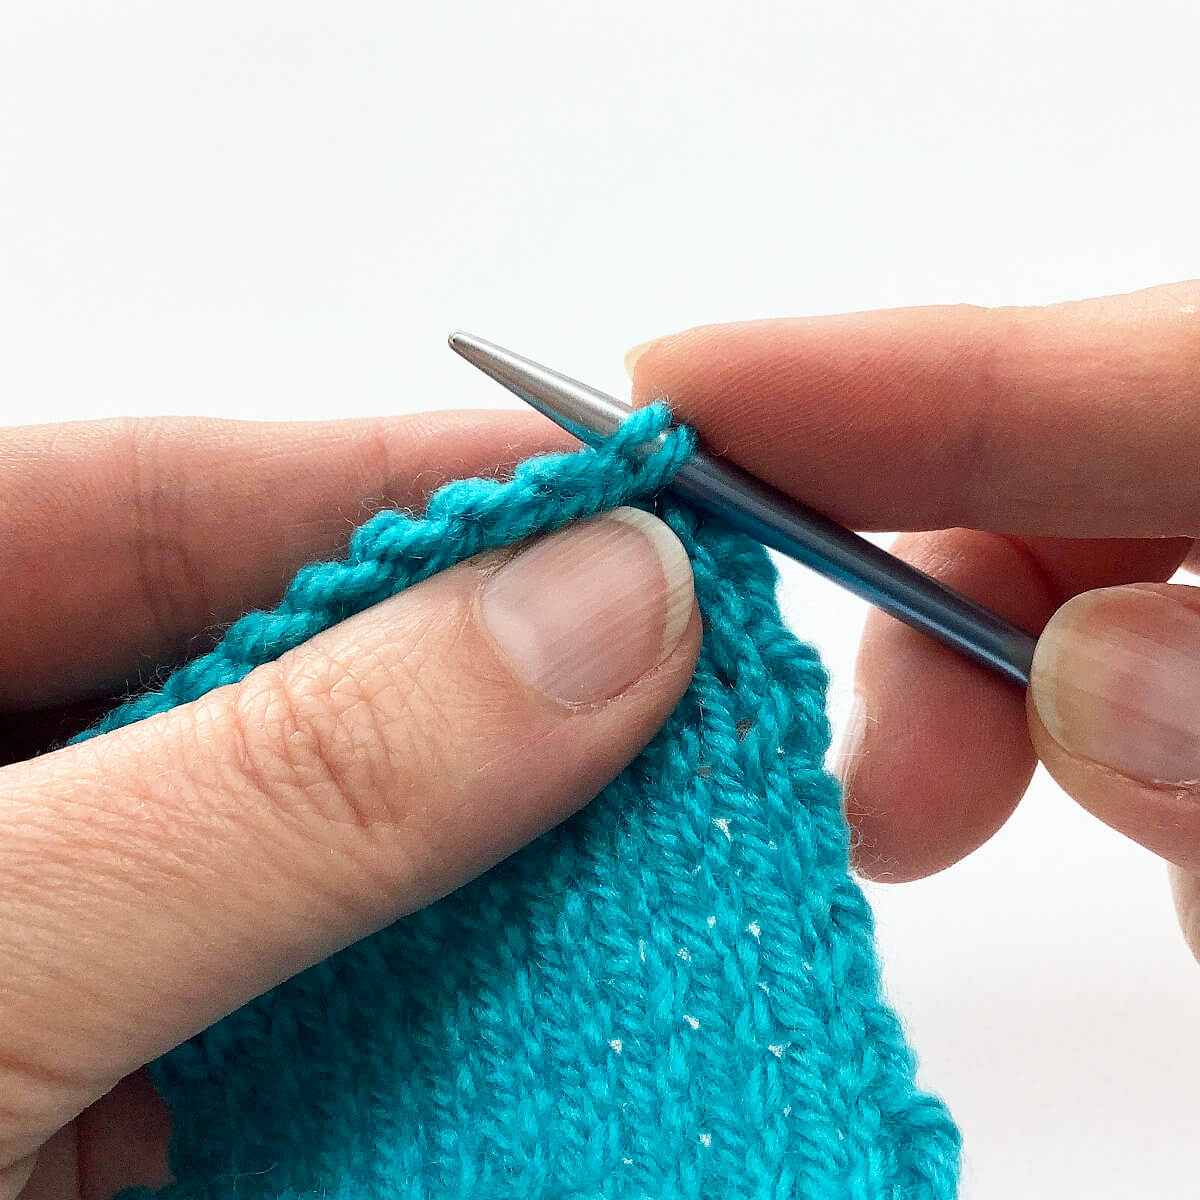 Pick up and knit step 1